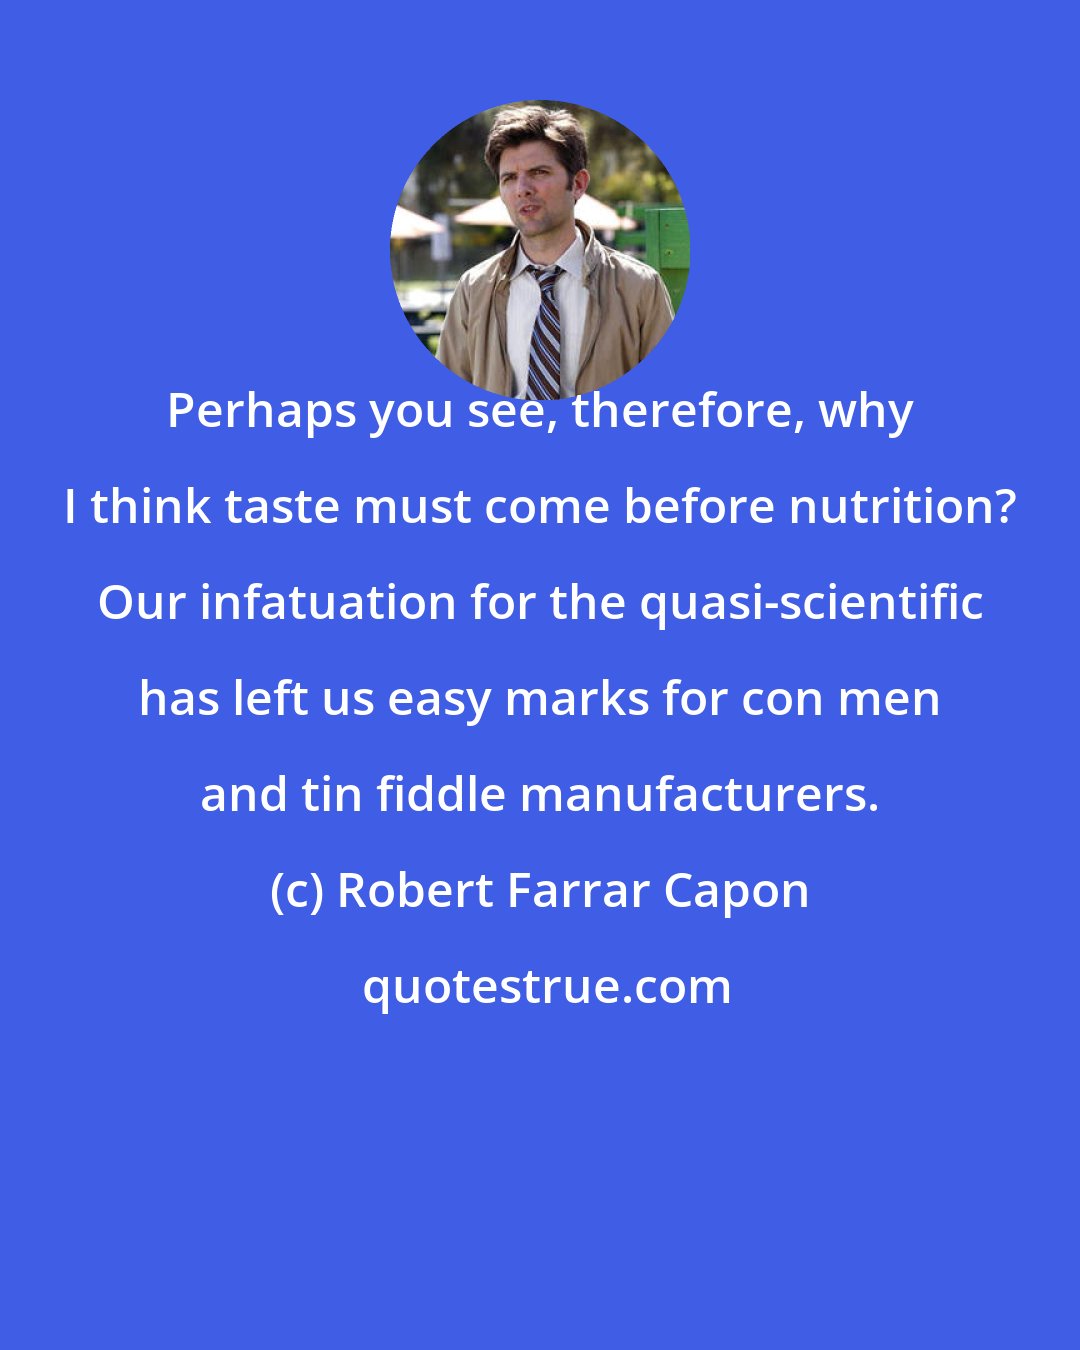 Robert Farrar Capon: Perhaps you see, therefore, why I think taste must come before nutrition? Our infatuation for the quasi-scientific has left us easy marks for con men and tin fiddle manufacturers.